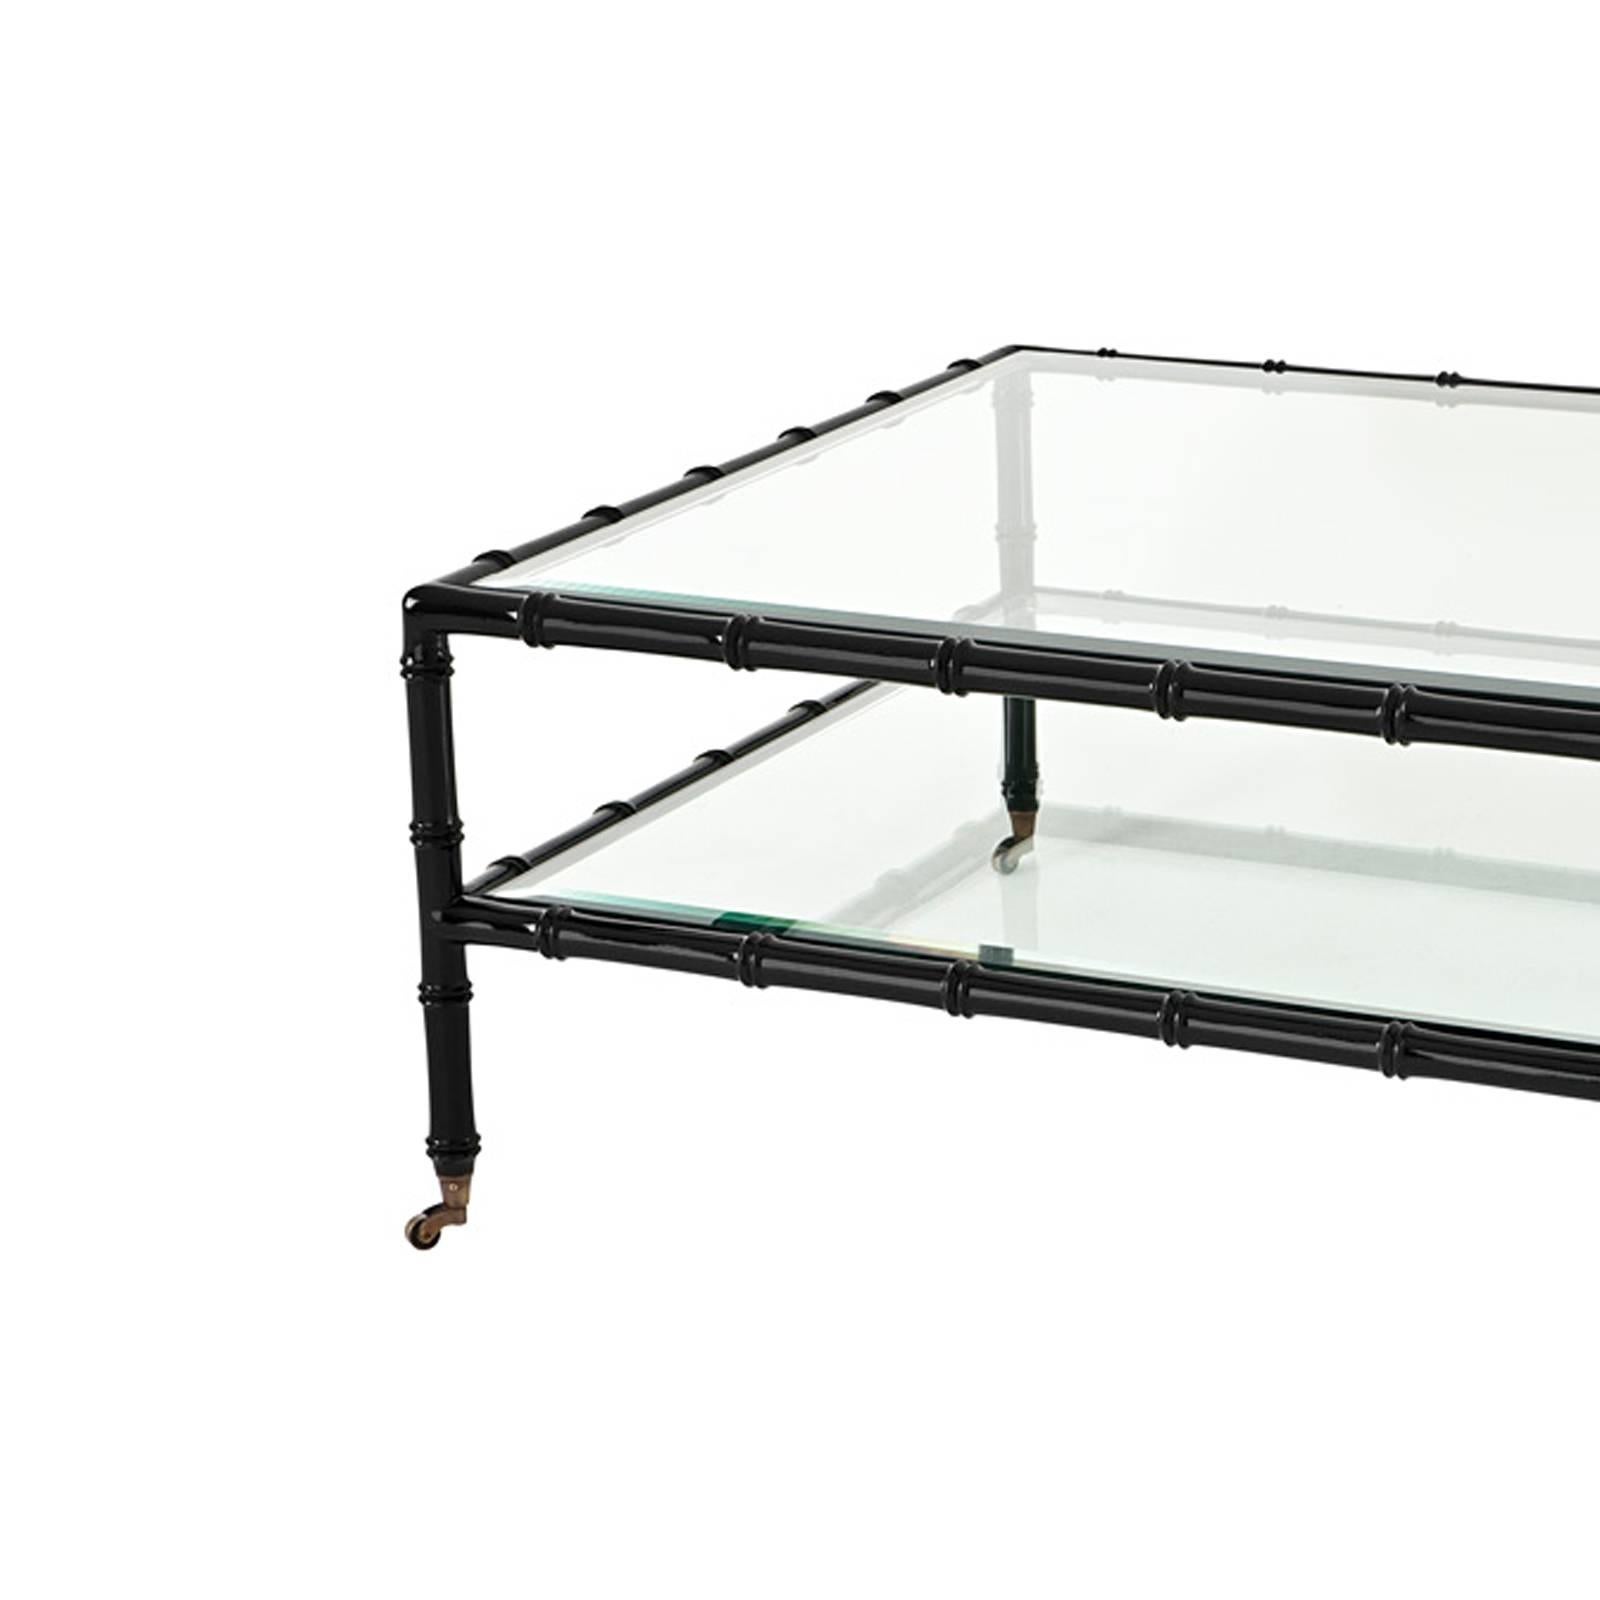 Coffee table bamboo in black finish teak wood.
On trolleys. Bevelled clear glass top.
